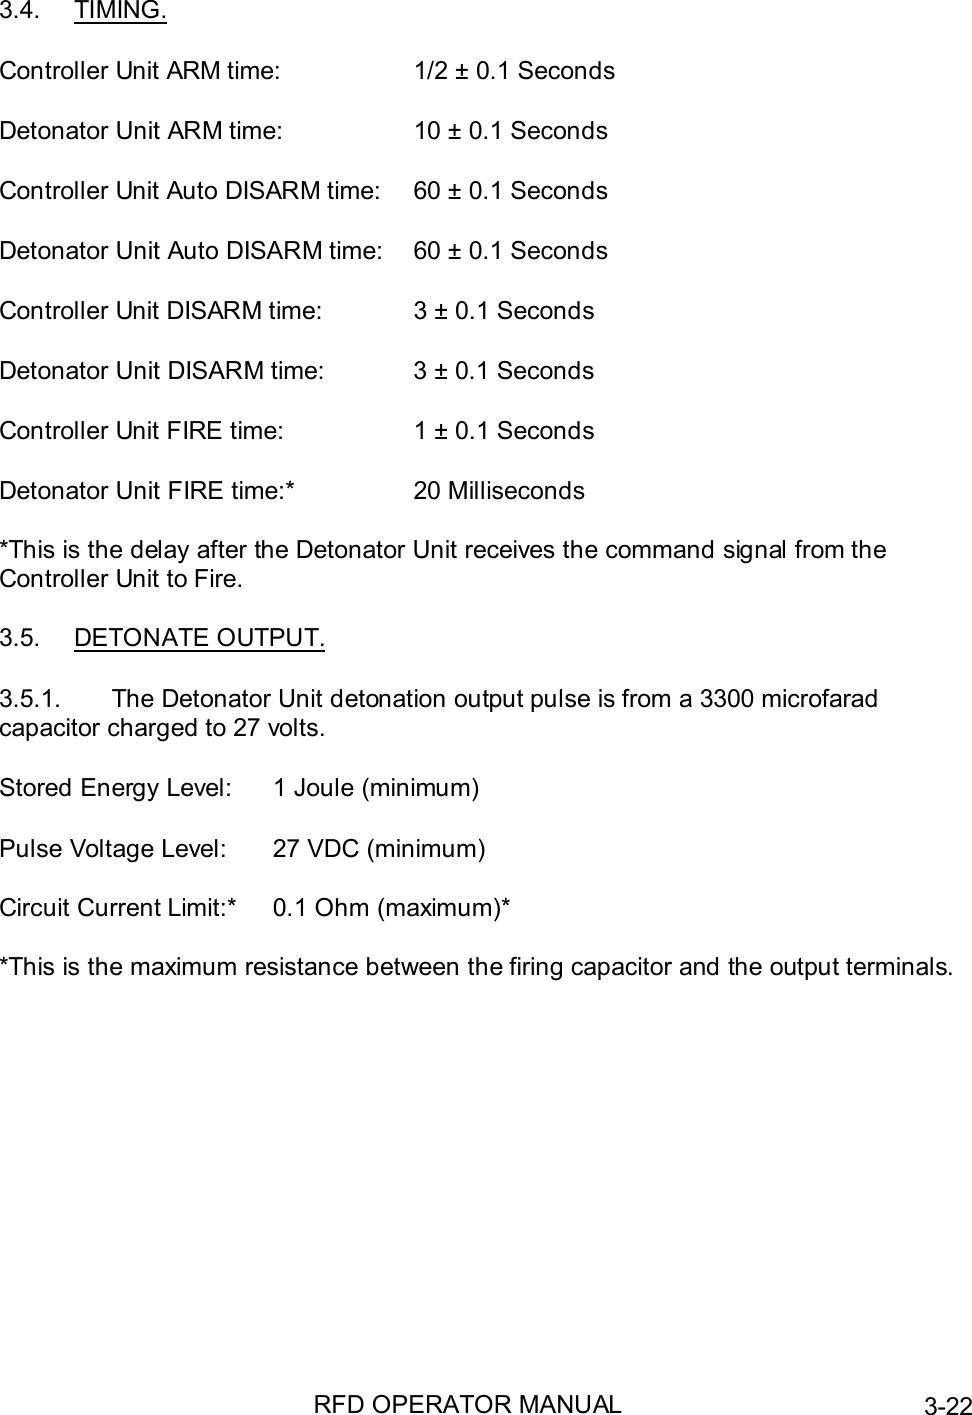 RFD OPERATOR MANUAL 3-223.4. TIMING.Controller Unit ARM time: 1/2 ± 0.1 SecondsDetonator Unit ARM time: 10 ± 0.1 SecondsController Unit Auto DISARM time: 60 ± 0.1 SecondsDetonator Unit Auto DISARM time: 60 ± 0.1 SecondsController Unit DISARM time: 3 ± 0.1 SecondsDetonator Unit DISARM time: 3 ± 0.1 SecondsController Unit FIRE time: 1 ± 0.1 SecondsDetonator Unit FIRE time:* 20 Milliseconds*This is the delay after the Detonator Unit receives the command signal from theController Unit to Fire.3.5. DETONATE OUTPUT.3.5.1.  The Detonator Unit detonation output pulse is from a 3300 microfaradcapacitor charged to 27 volts.Stored Energy Level: 1 Joule (minimum)Pulse Voltage Level: 27 VDC (minimum)Circuit Current Limit:* 0.1 Ohm (maximum)**This is the maximum resistance between the firing capacitor and the output terminals.